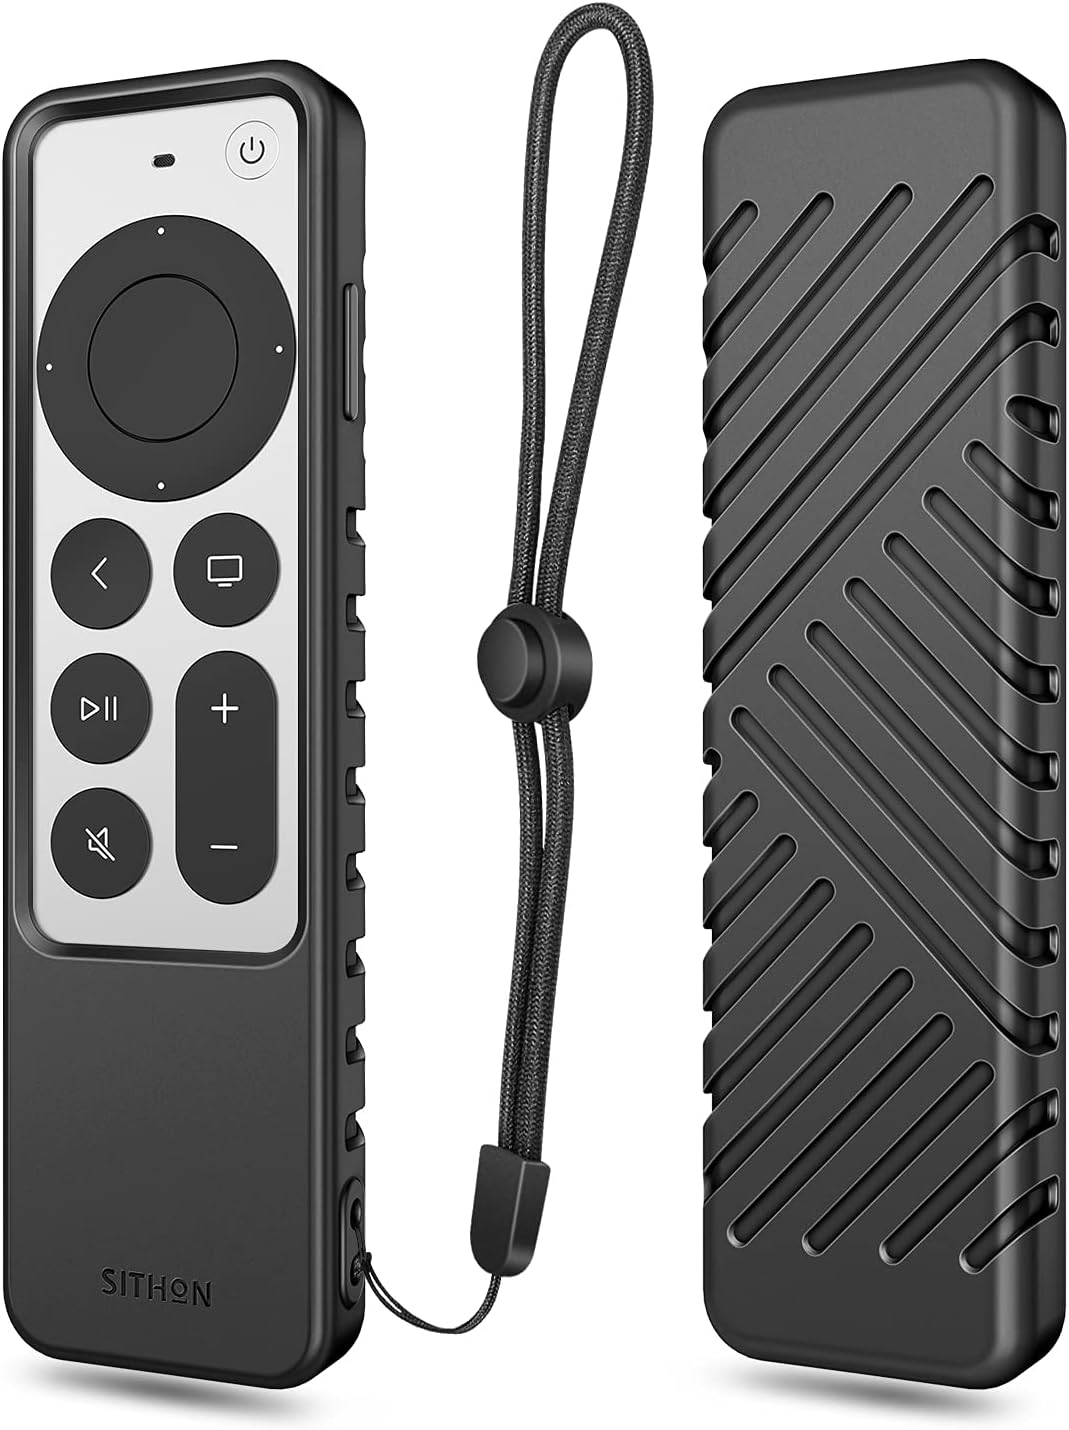 SITHON Silicone Case for Apple TV 4K 2022 2021 Remote, Lightweight Shockproof Anti Slip Protective Cover with Lanyard Strap for Apple TV 4K / HD Siri Remote (3rd Gen / 2nd Gen), Black